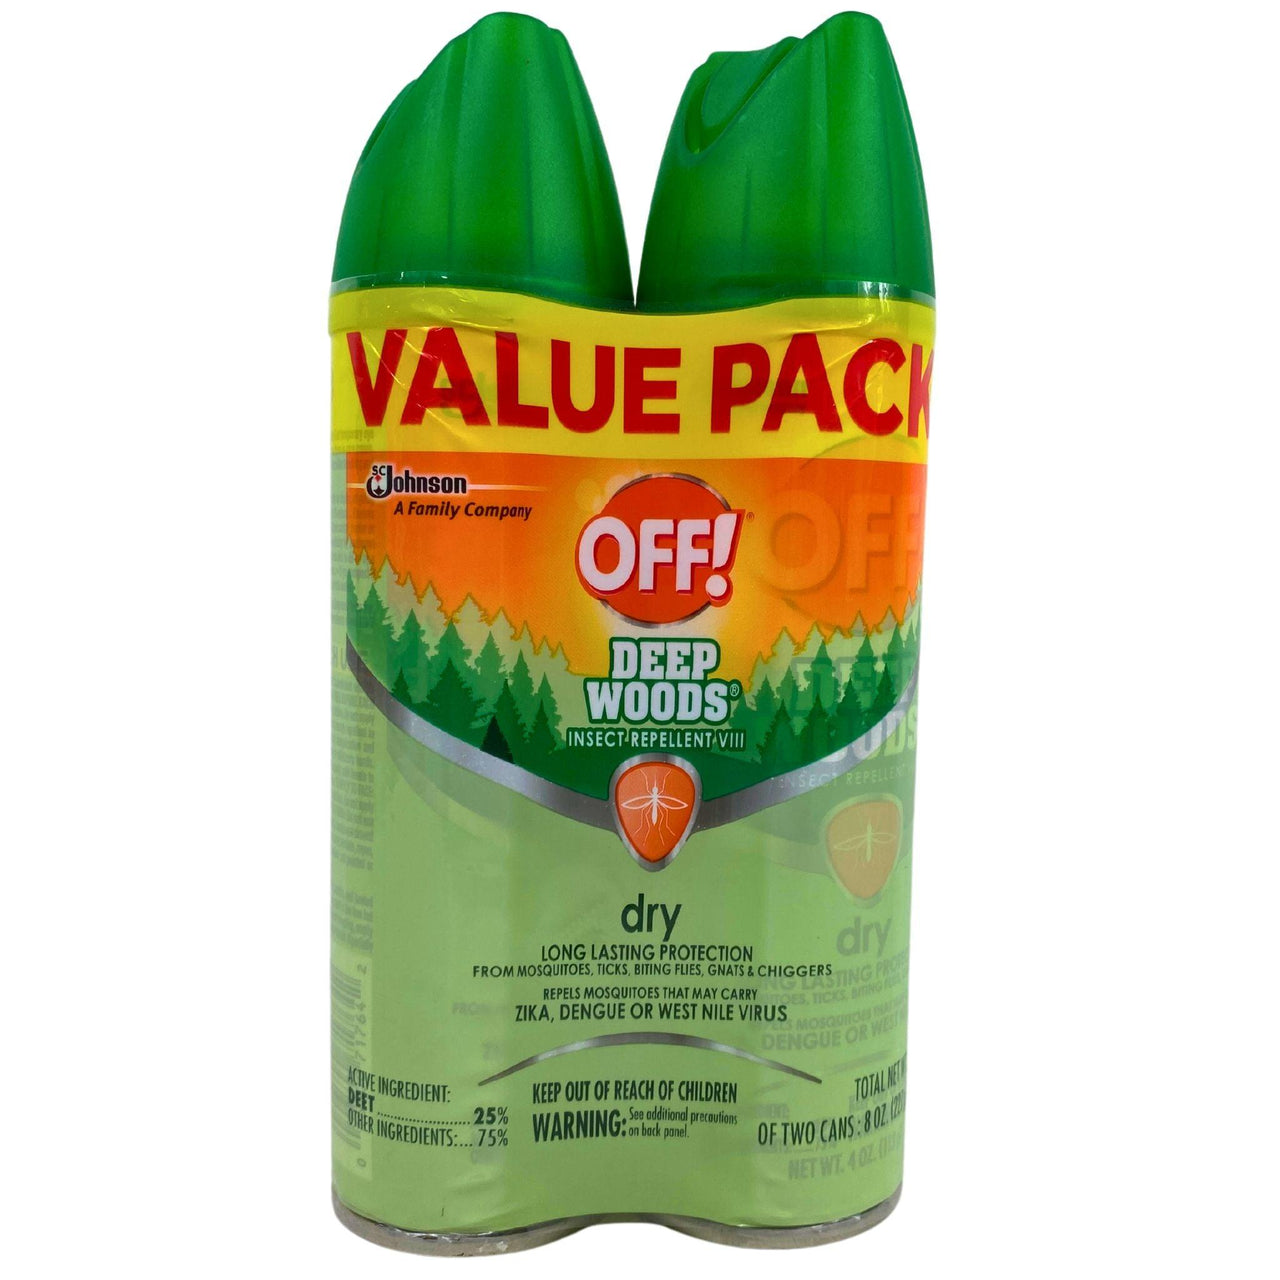 OFF! Deep Woods Value Pack Insect Repellent VIII Dry Long Lasting Protection (2 cans = 8oz ) (50 Pcs Lot) - Discount Wholesalers Inc